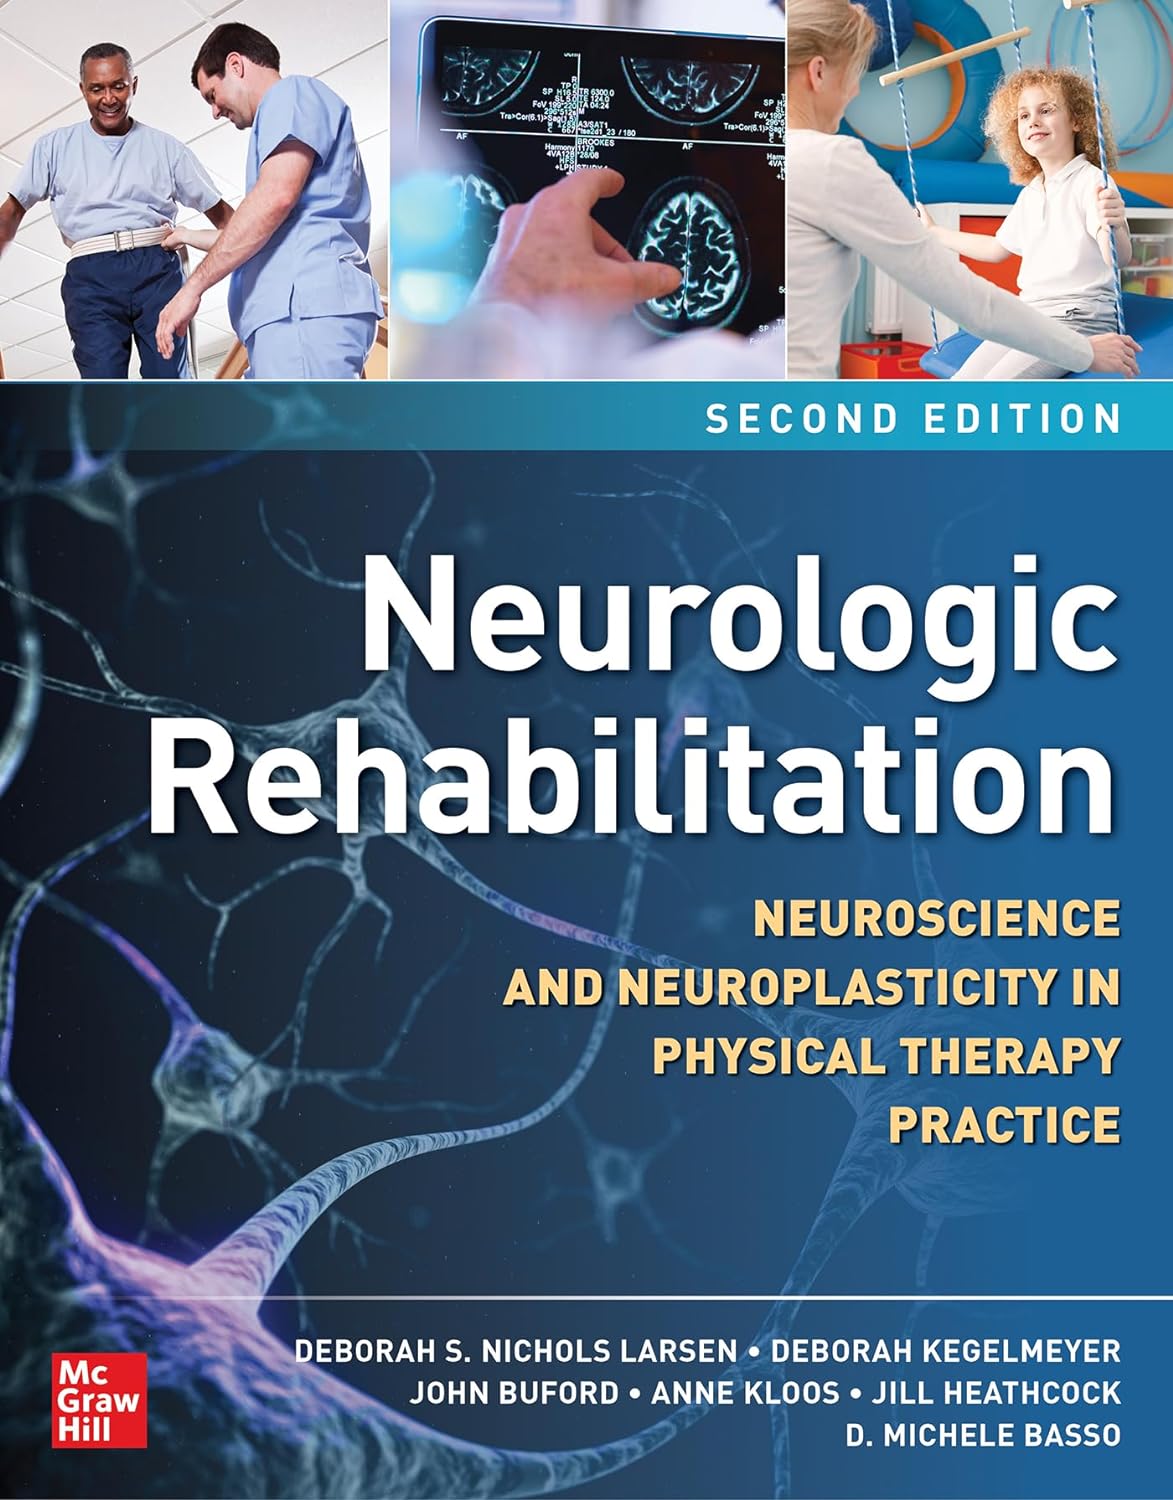 Neurologic Rehabilitation, Neuroscience and Neuroplasticity in Physical Therapy Practice 2nd Edition